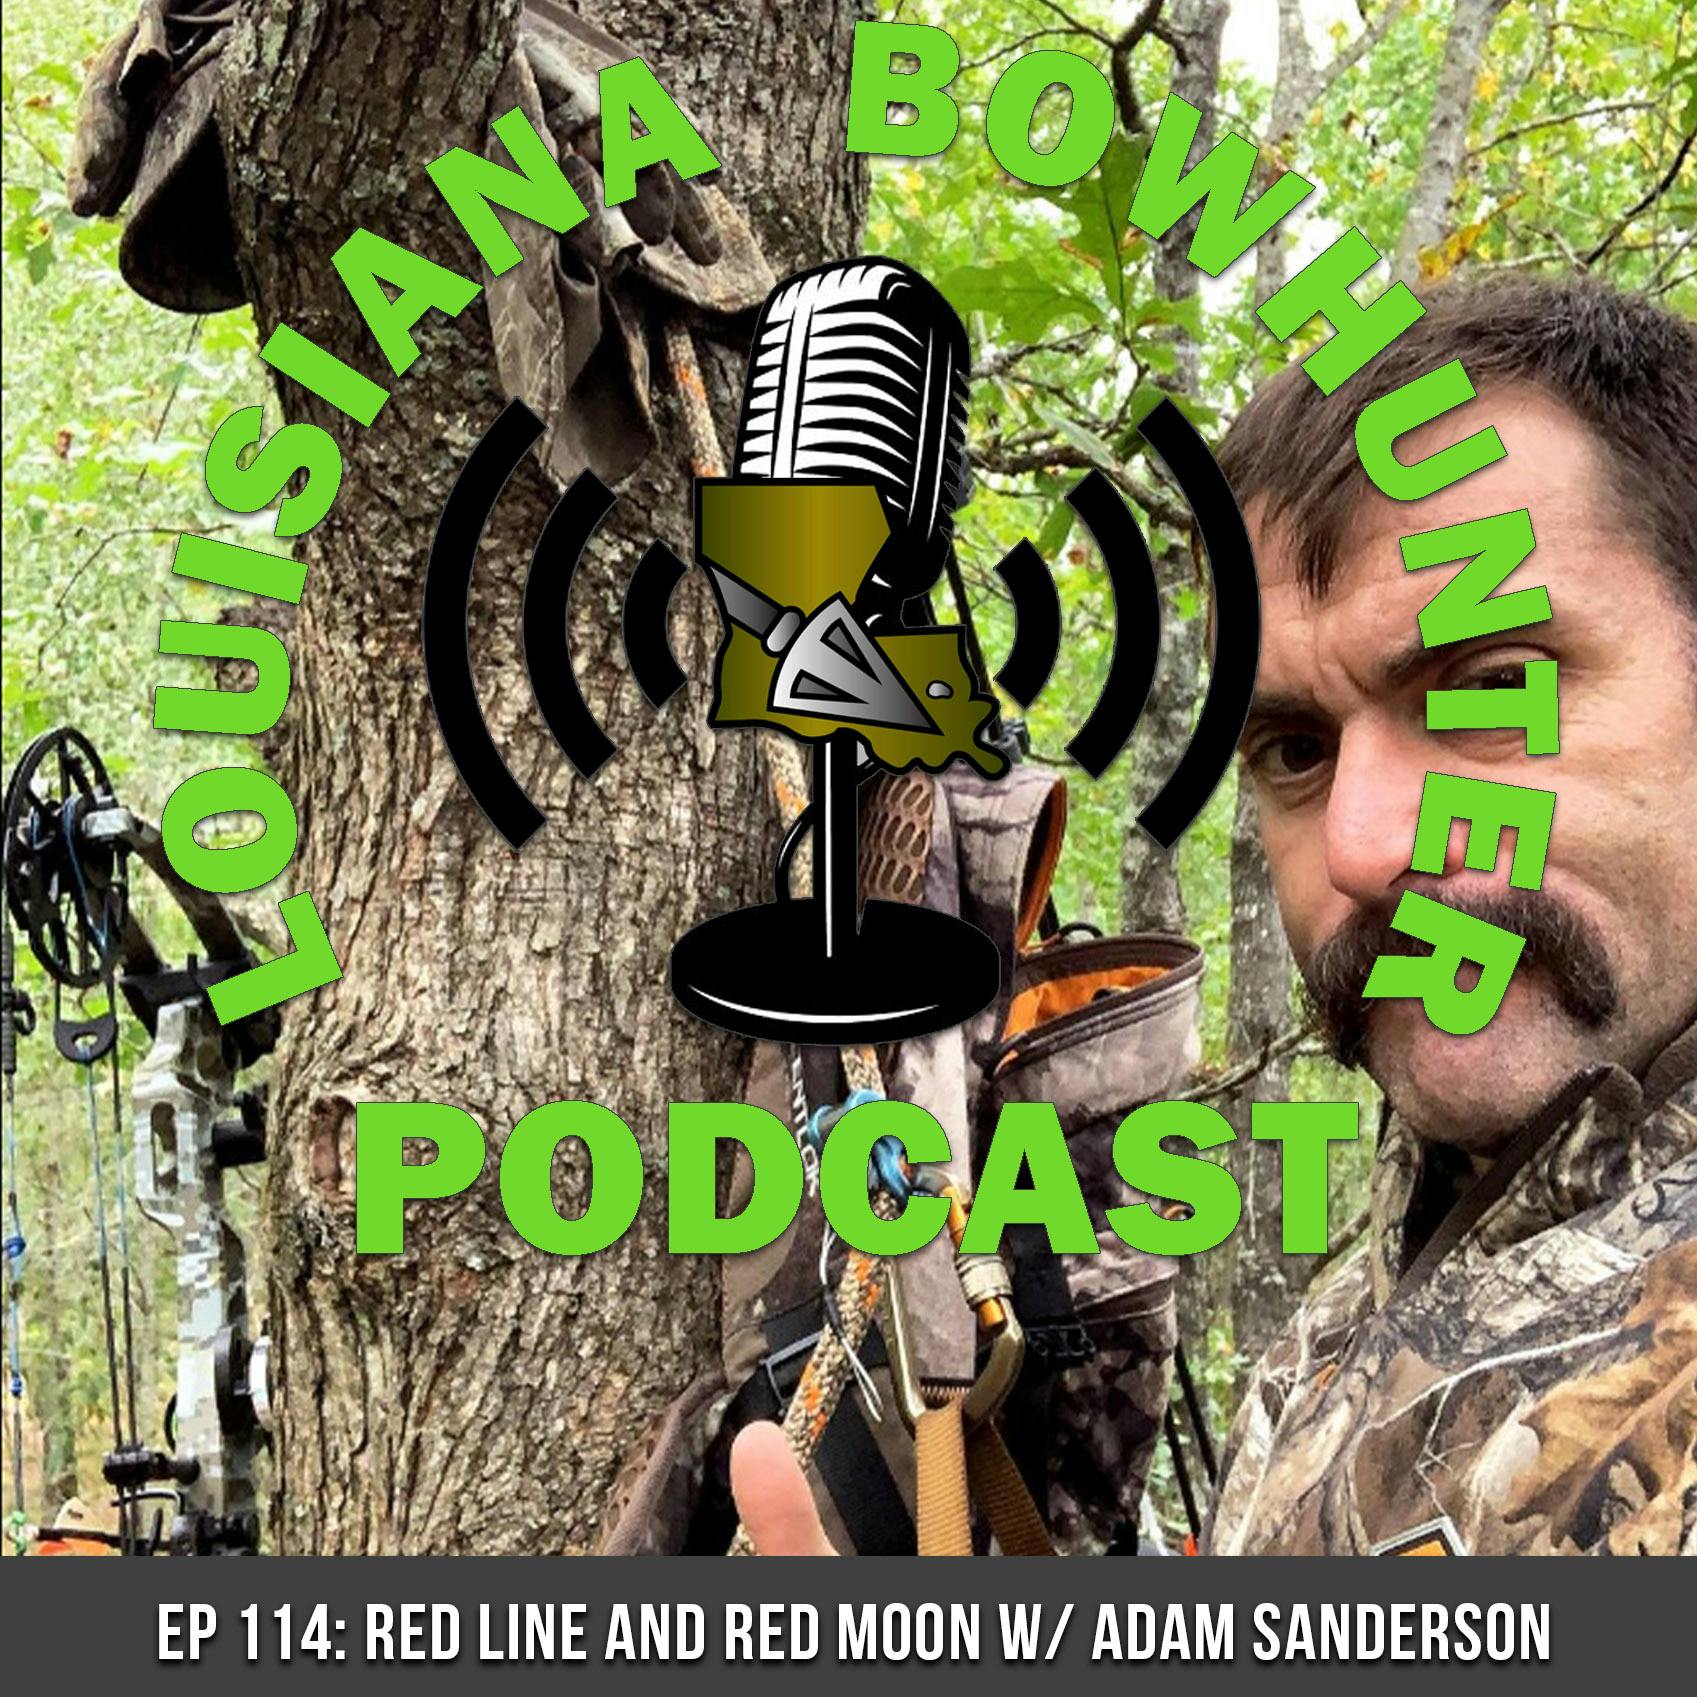 Episode 114: Red Line and Red Moon w/ Adam Sanderson